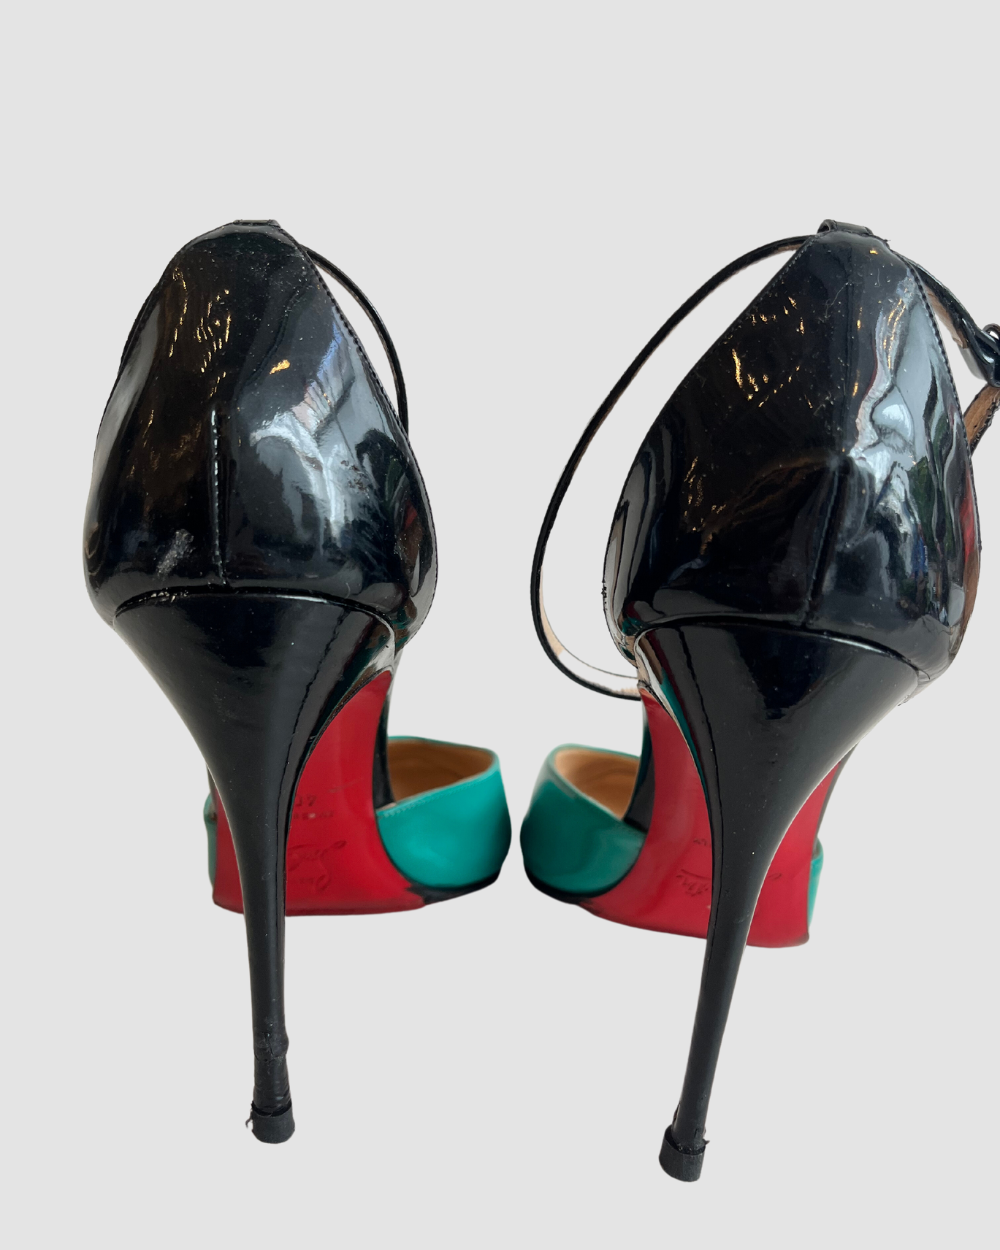 Christian Louboutin Teal & Black Patent Leather Heels, 40.5